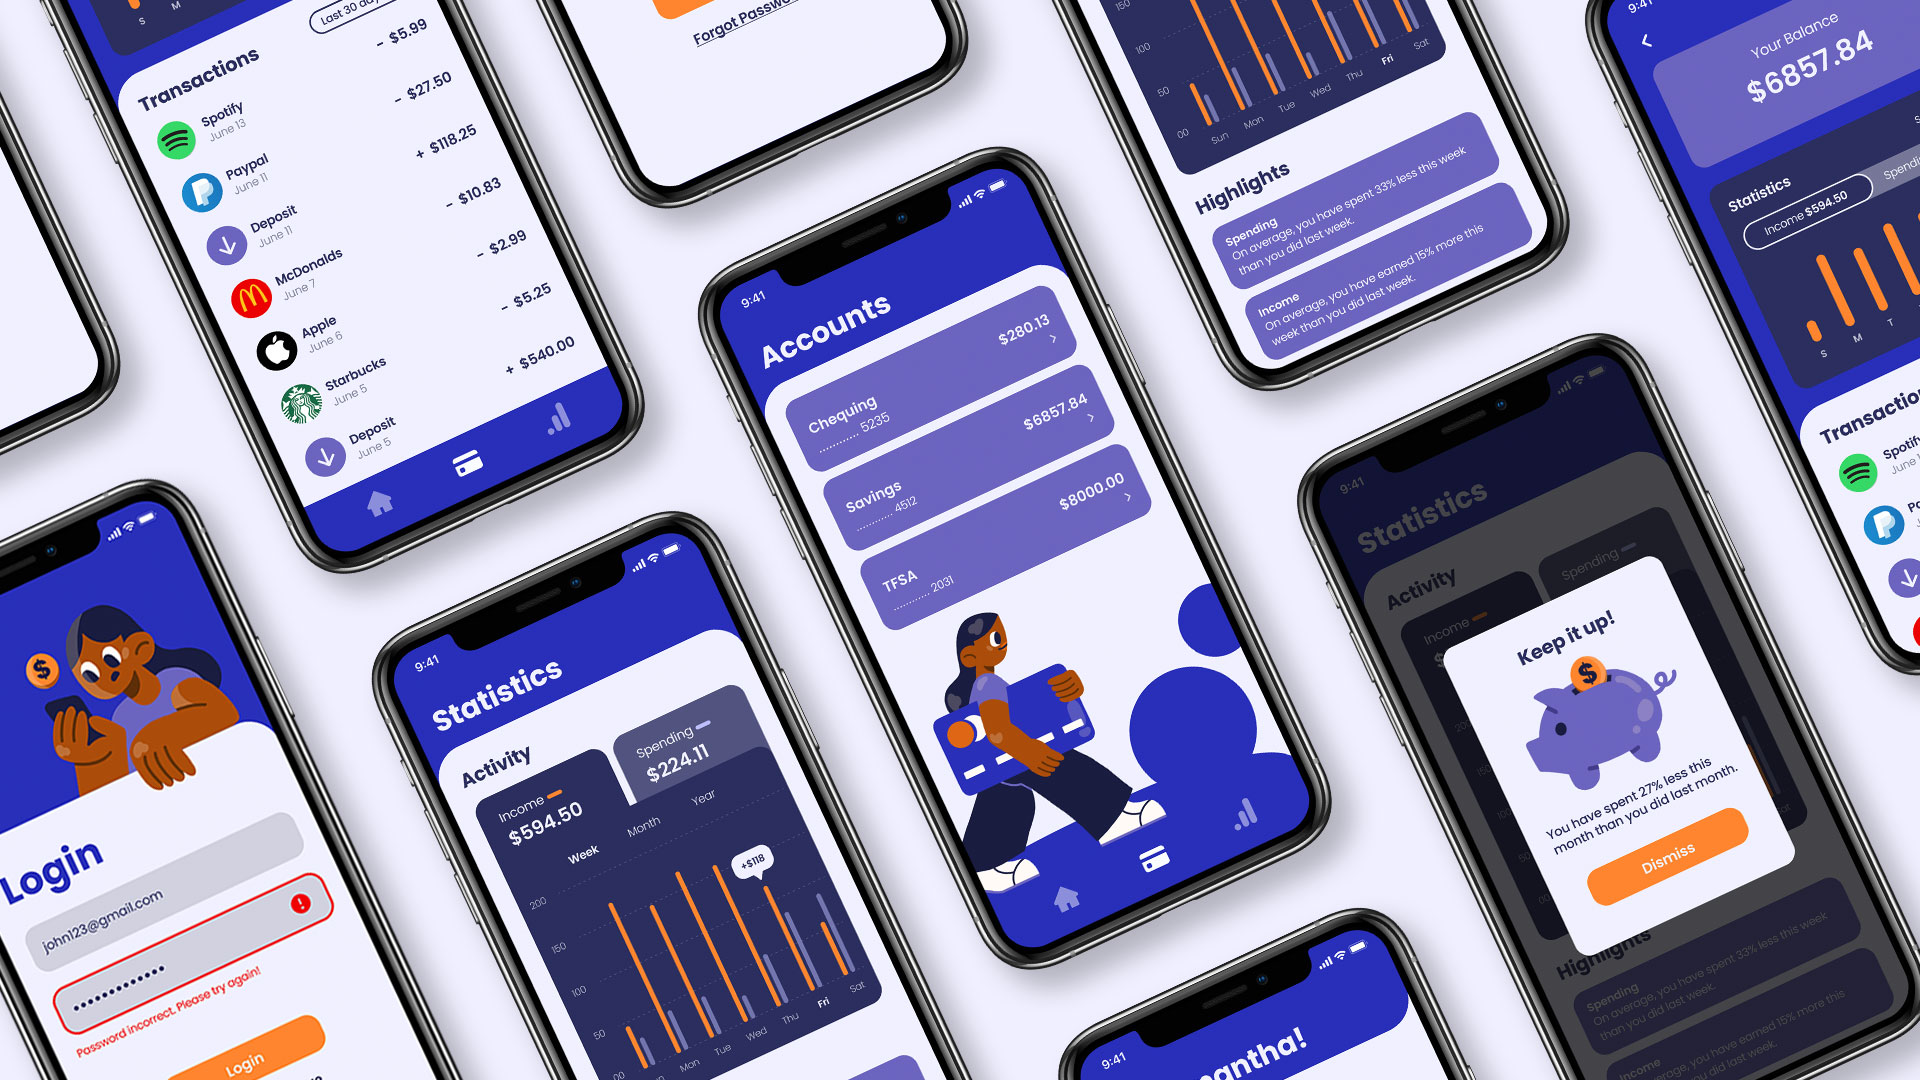 Multiple iPhone mockup screens for the Forwo financial app, shown in an isometric grid.